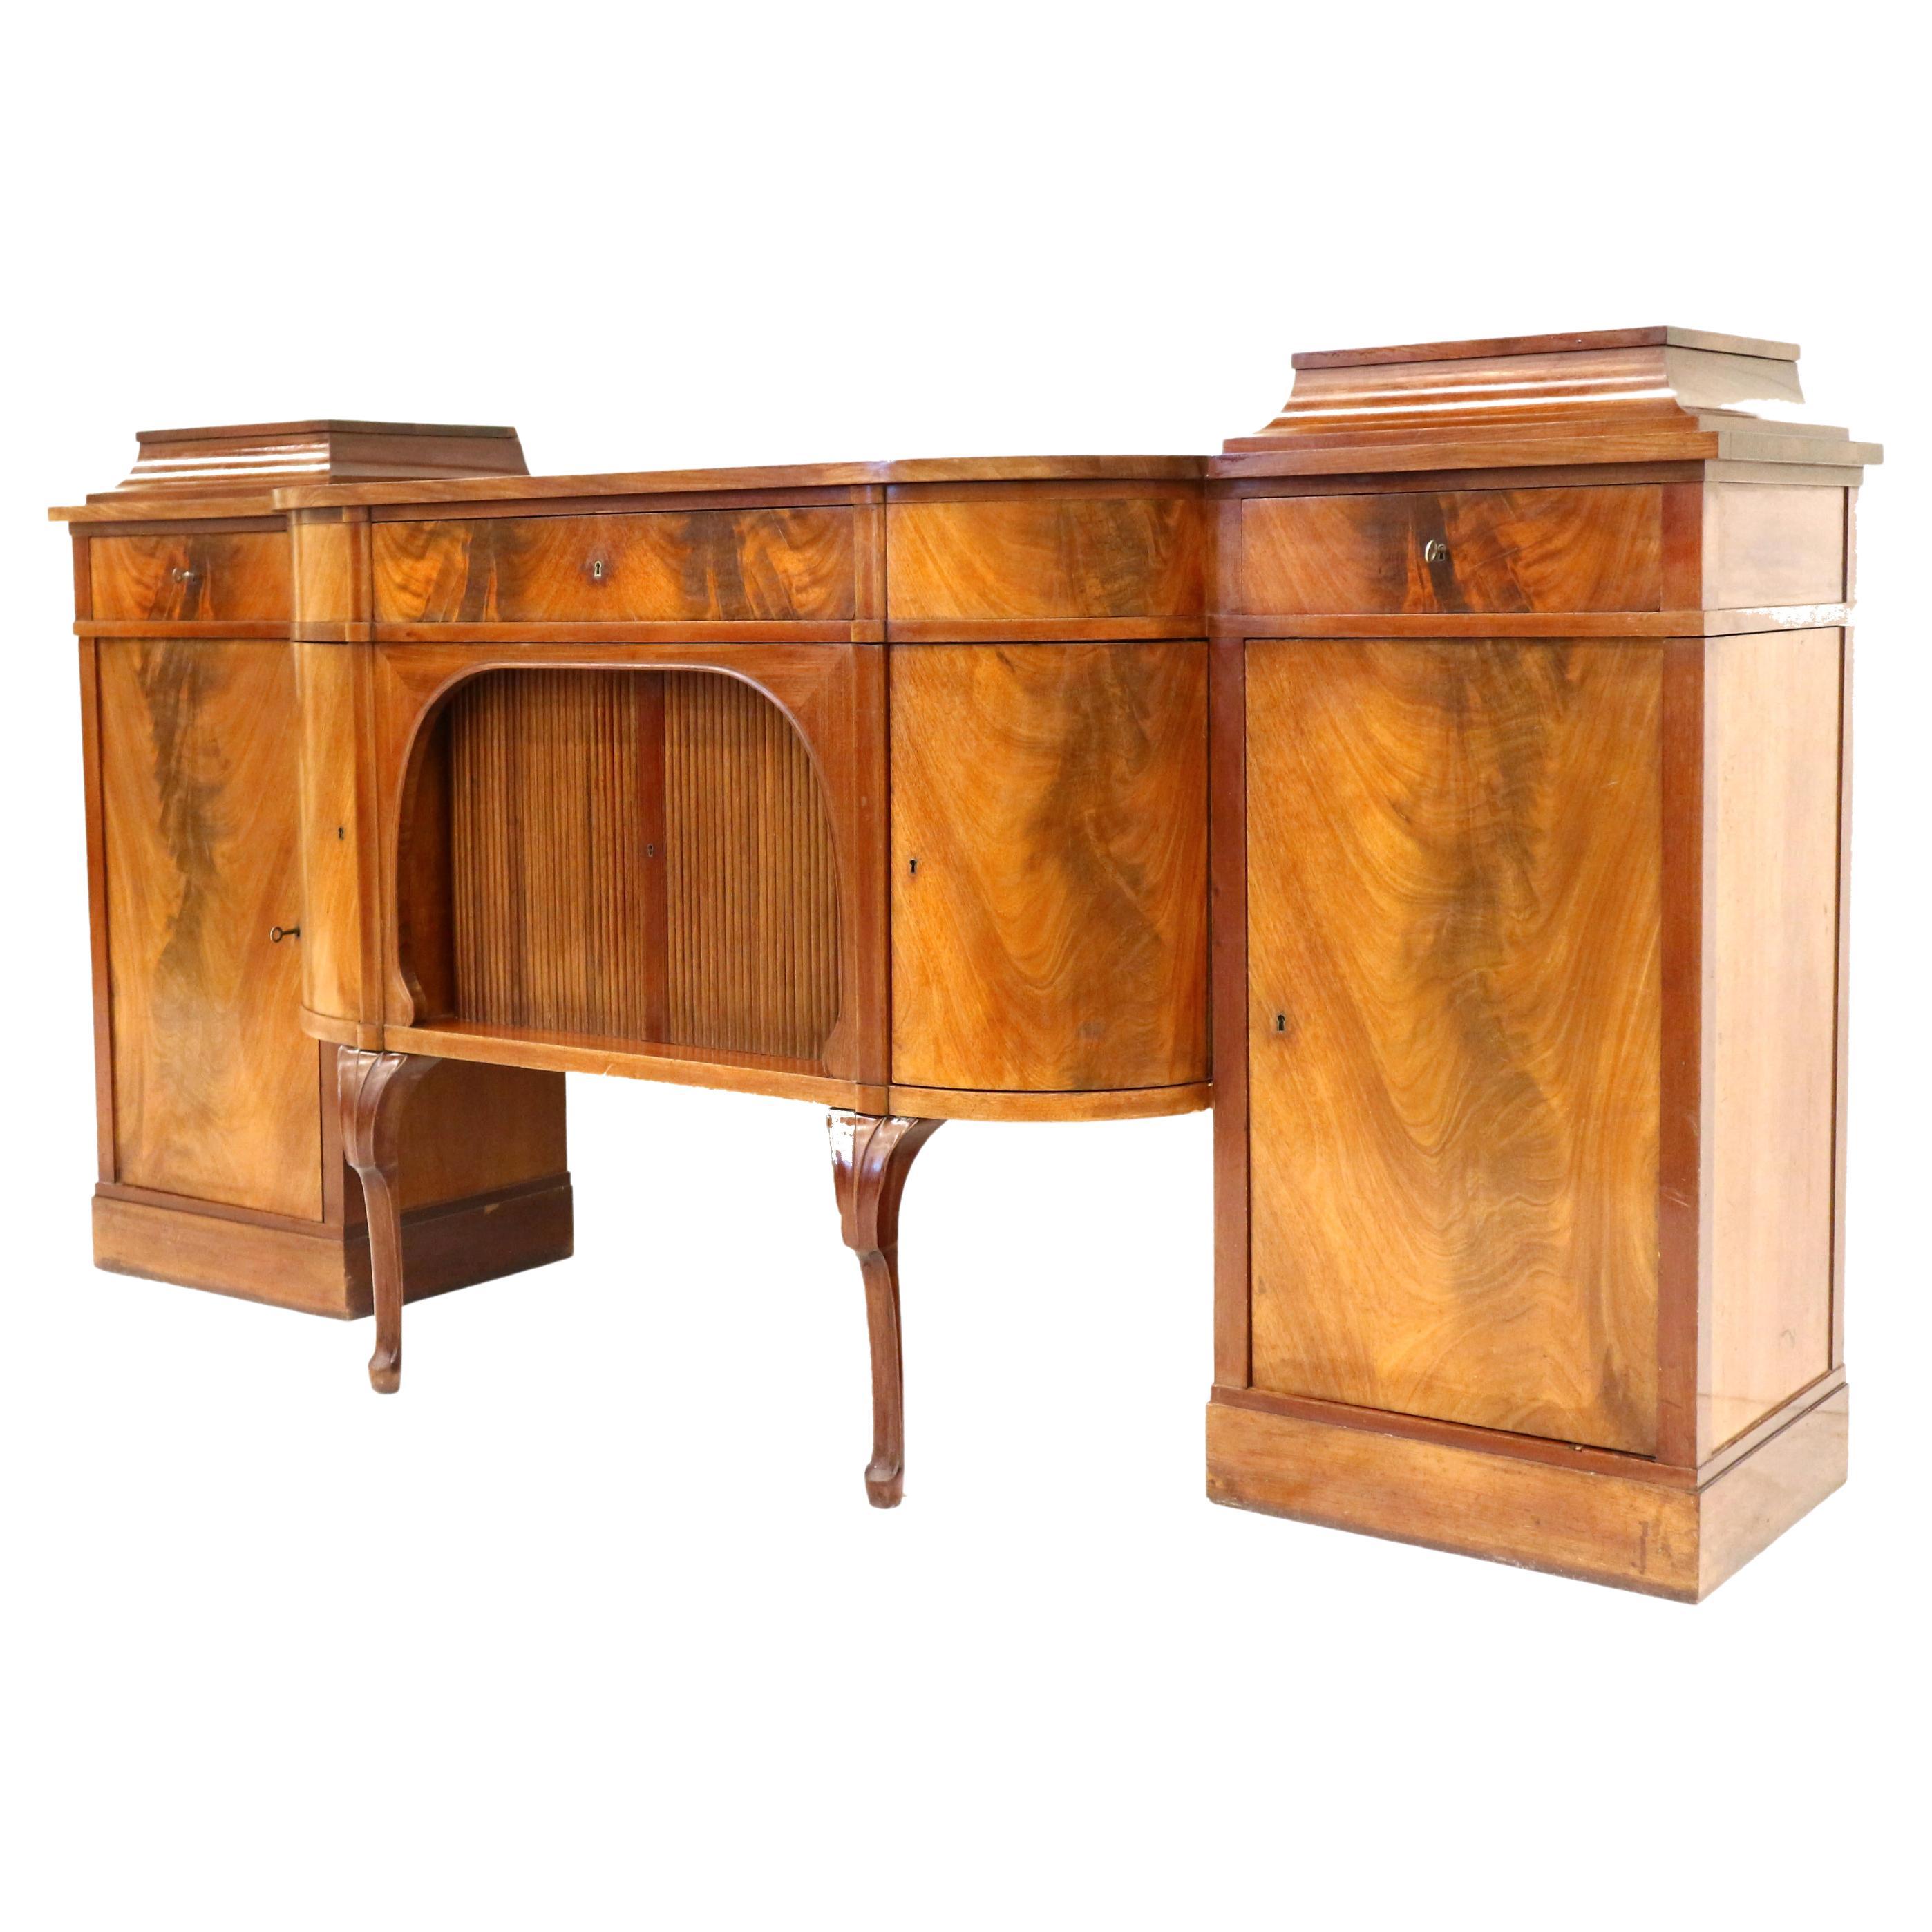 Unique Victorian flamed sideboard from the 19th century For Sale